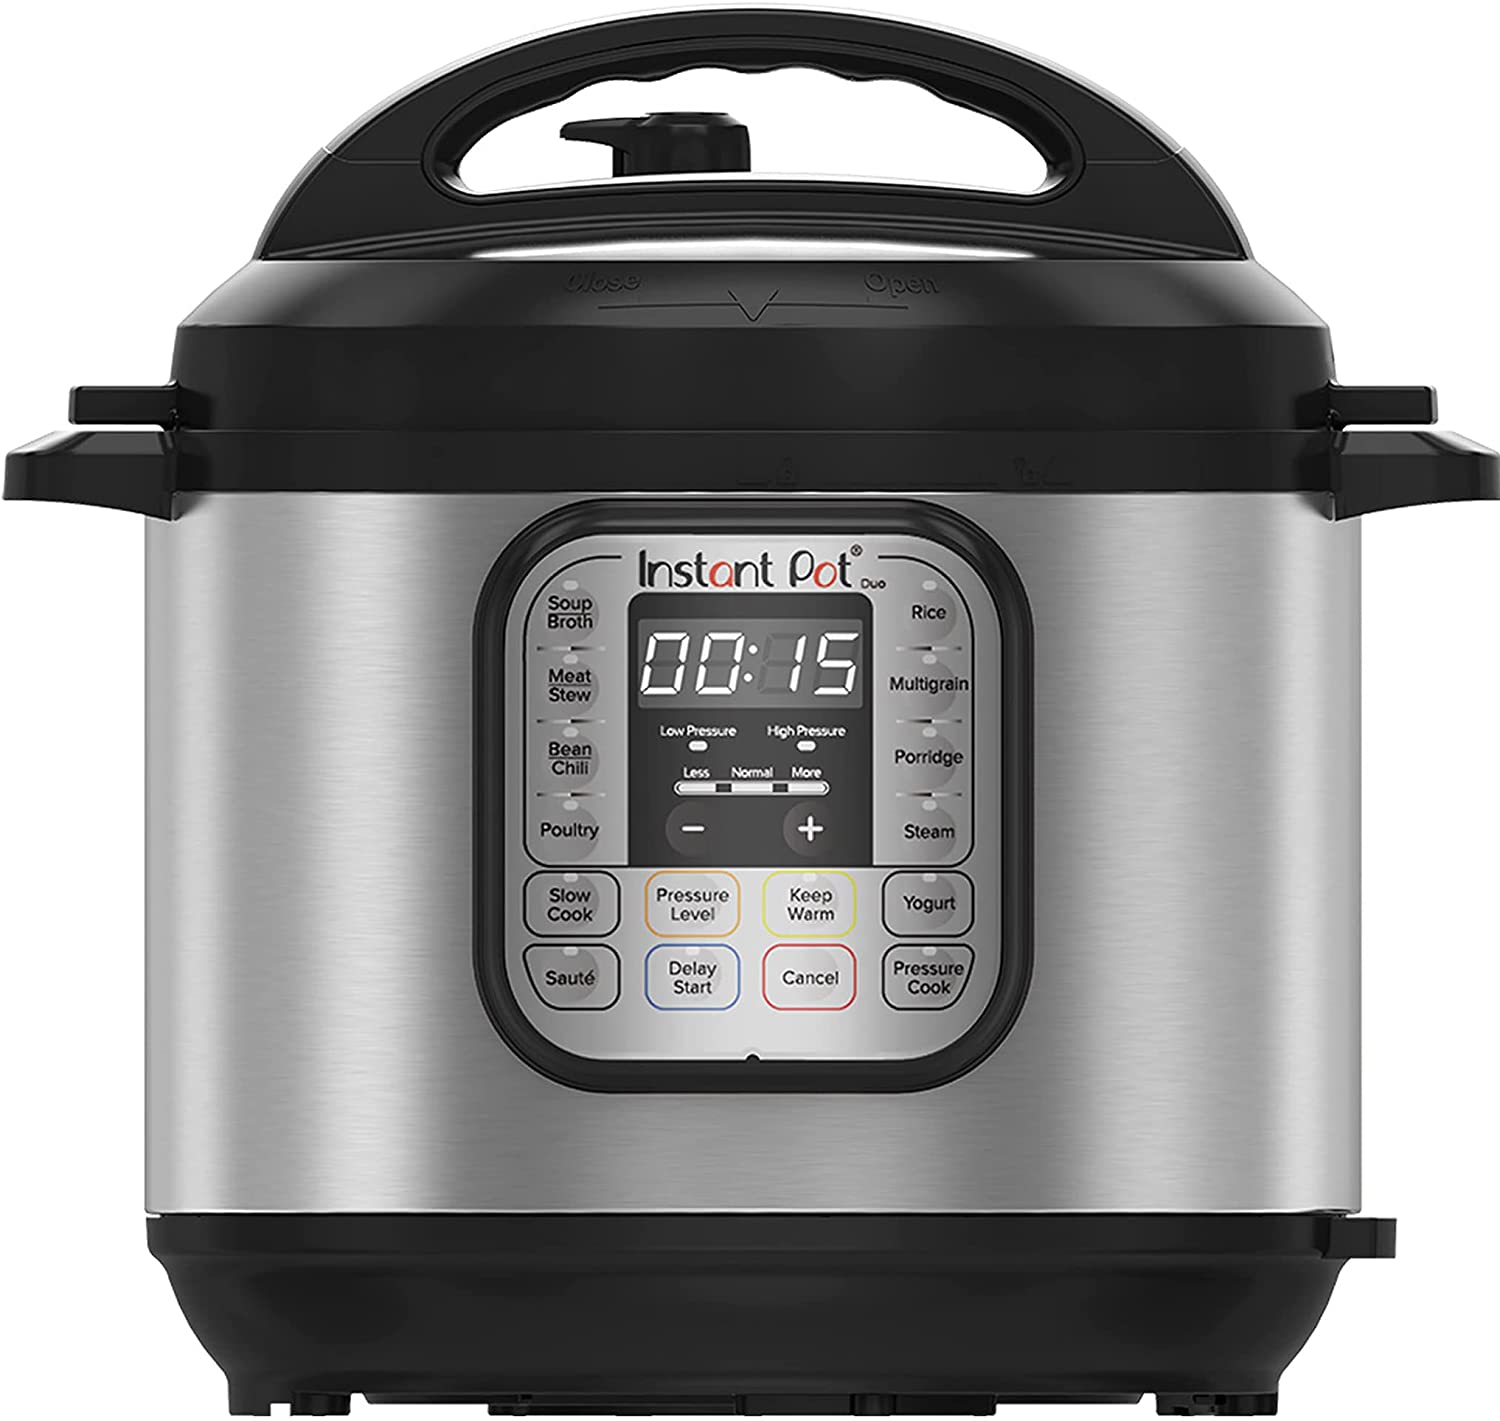 Instant Brands 8-Quart Programmable Electric Pressure Cooker in